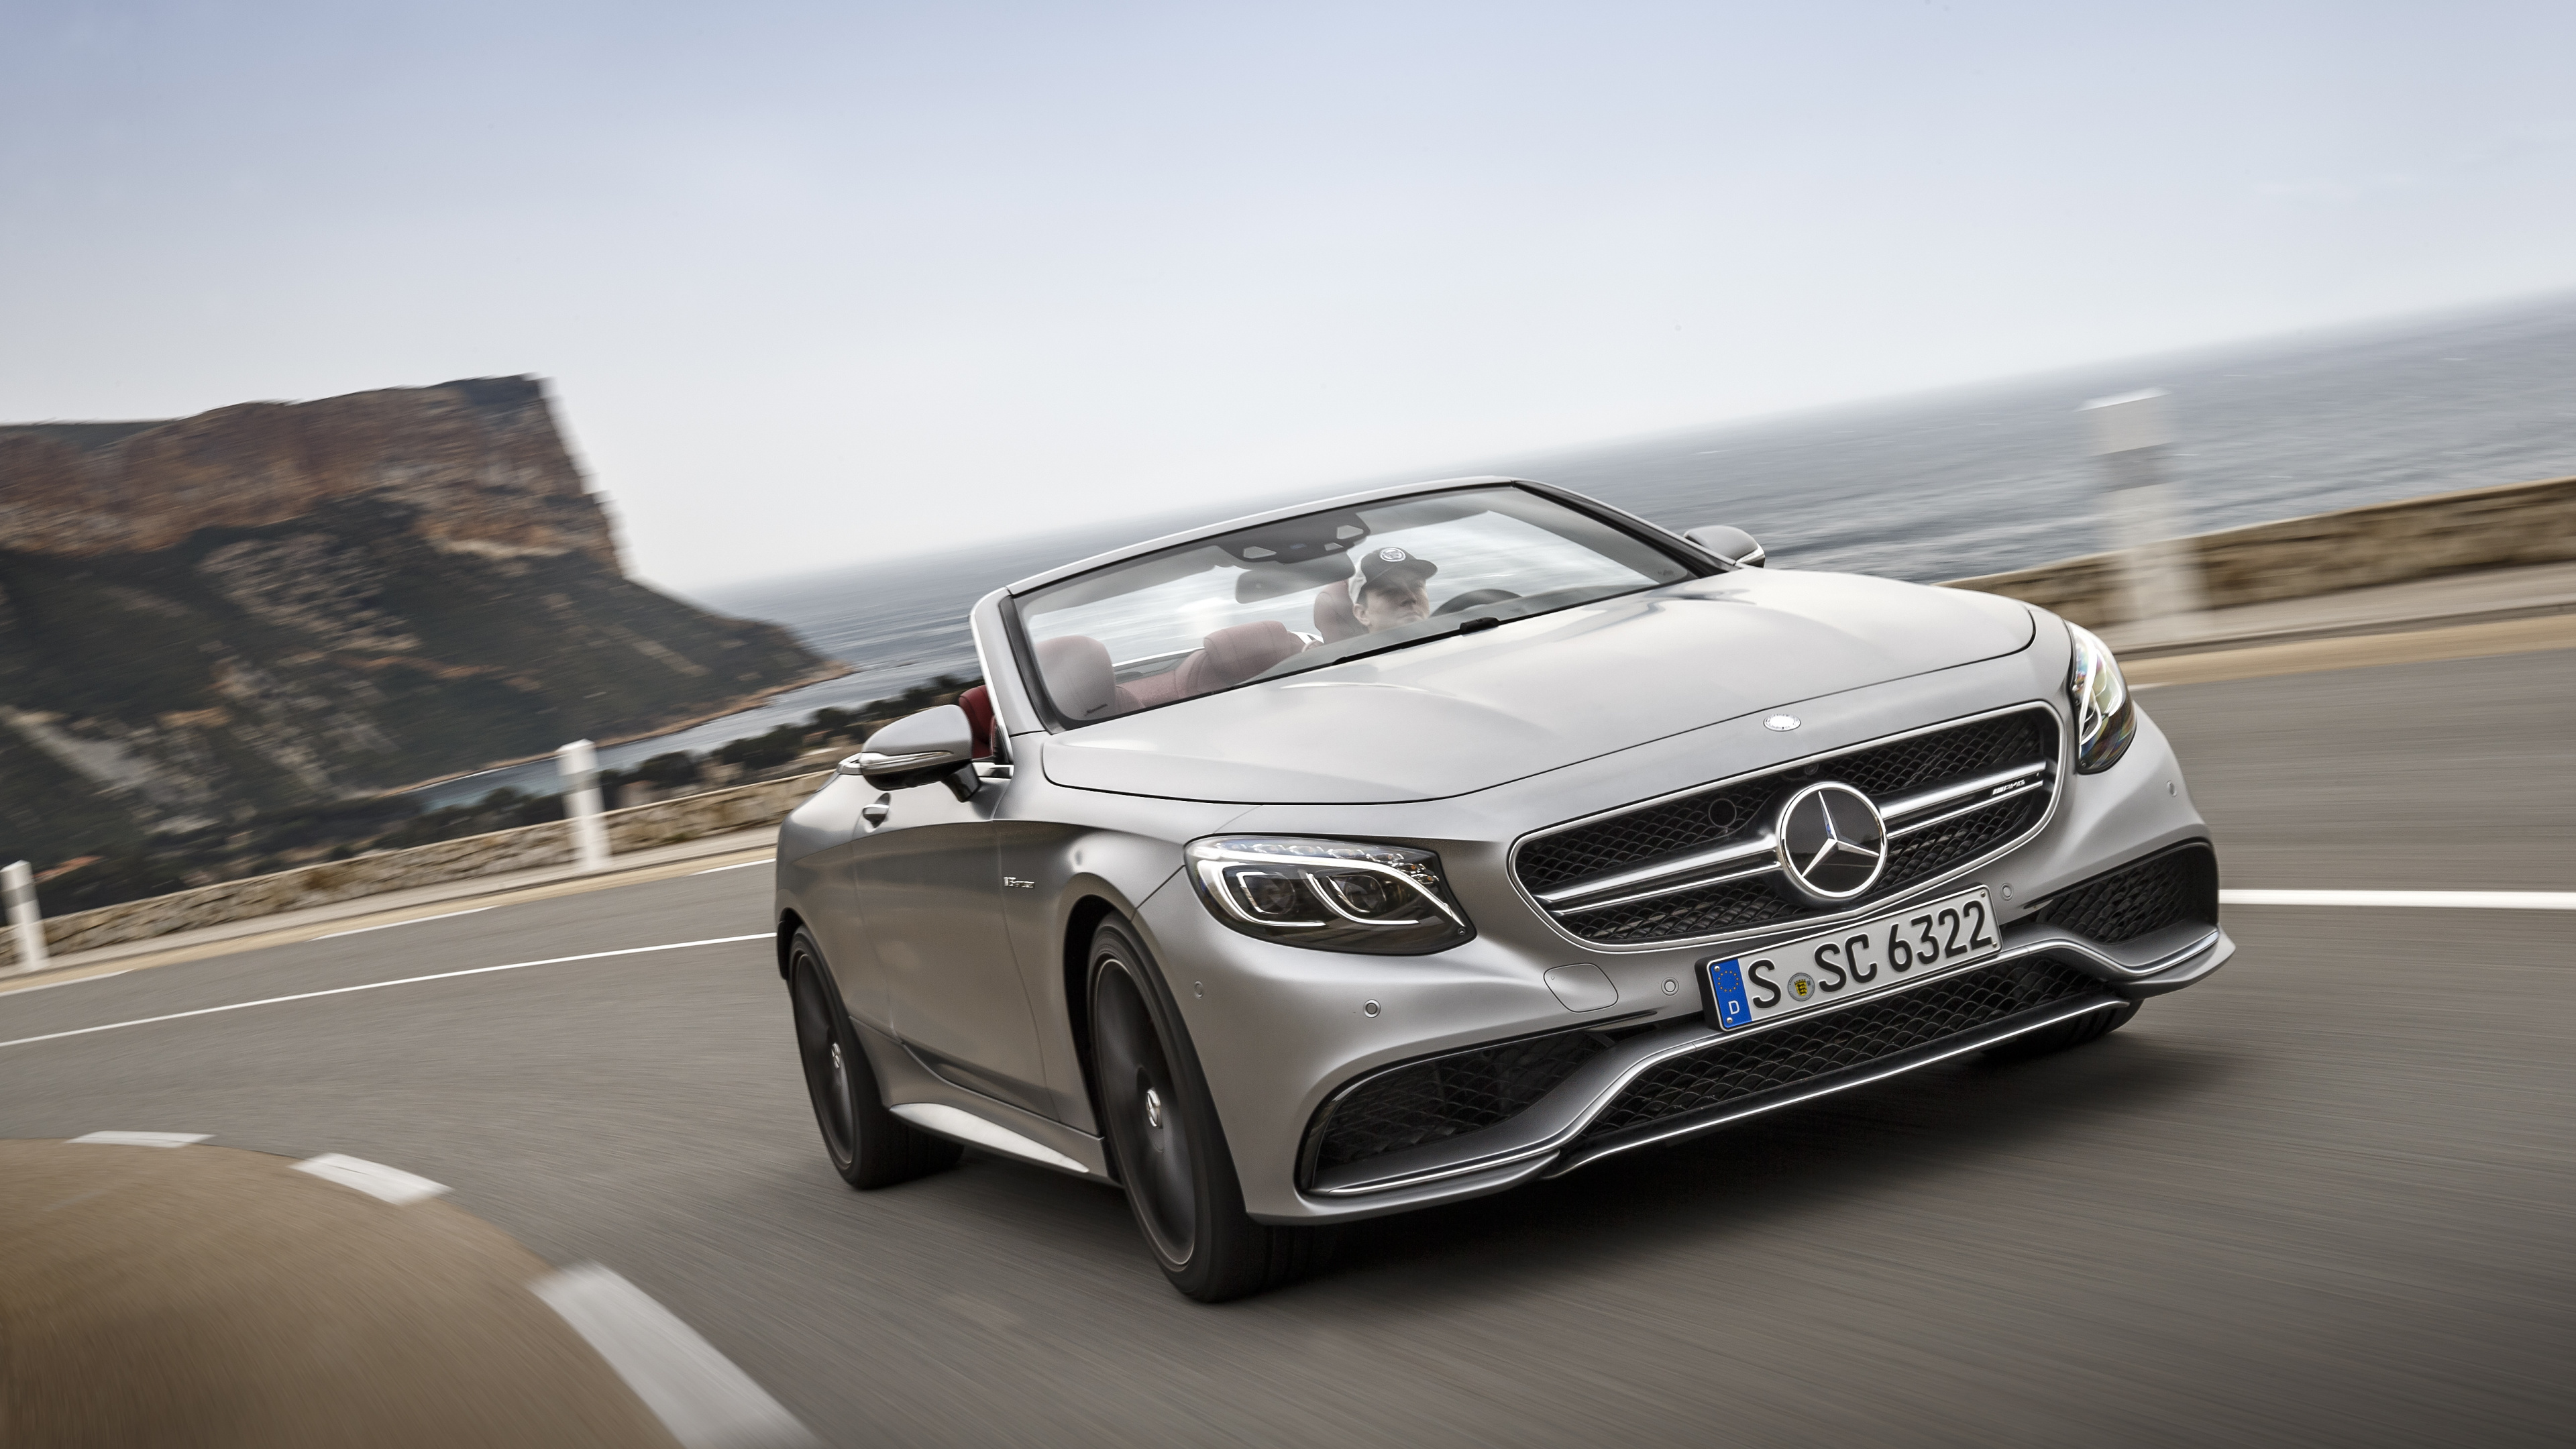 Gray Mercedes Benz Convertible Coupe on Road During Daytime. Wallpaper in 3840x2160 Resolution